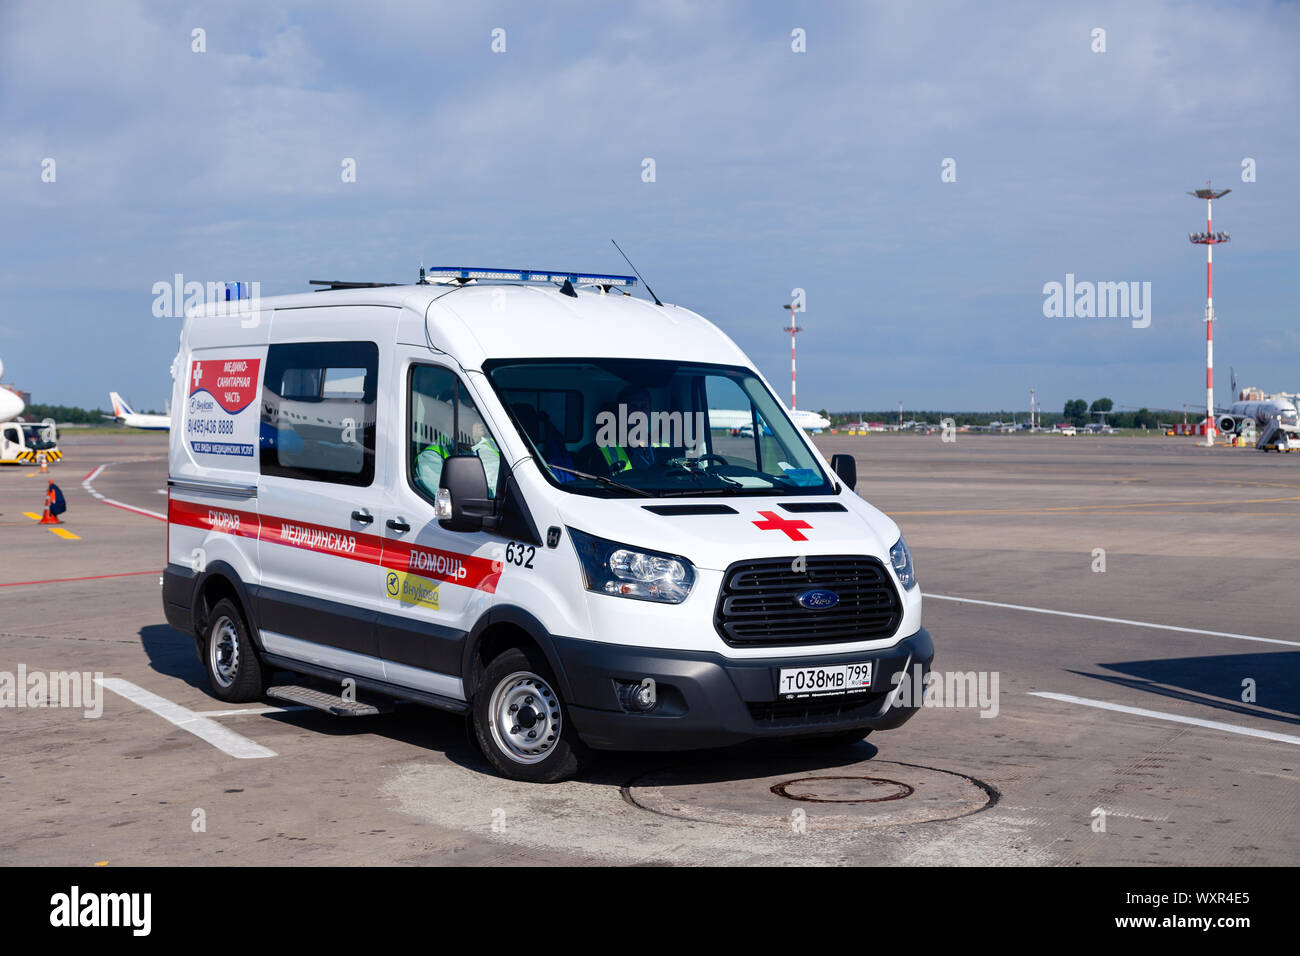 Russia Moscow 2019-06-17 Ford ambulance car on the background of the airport runway, large bus for transportation and transfer of passengers arriving Stock Photo